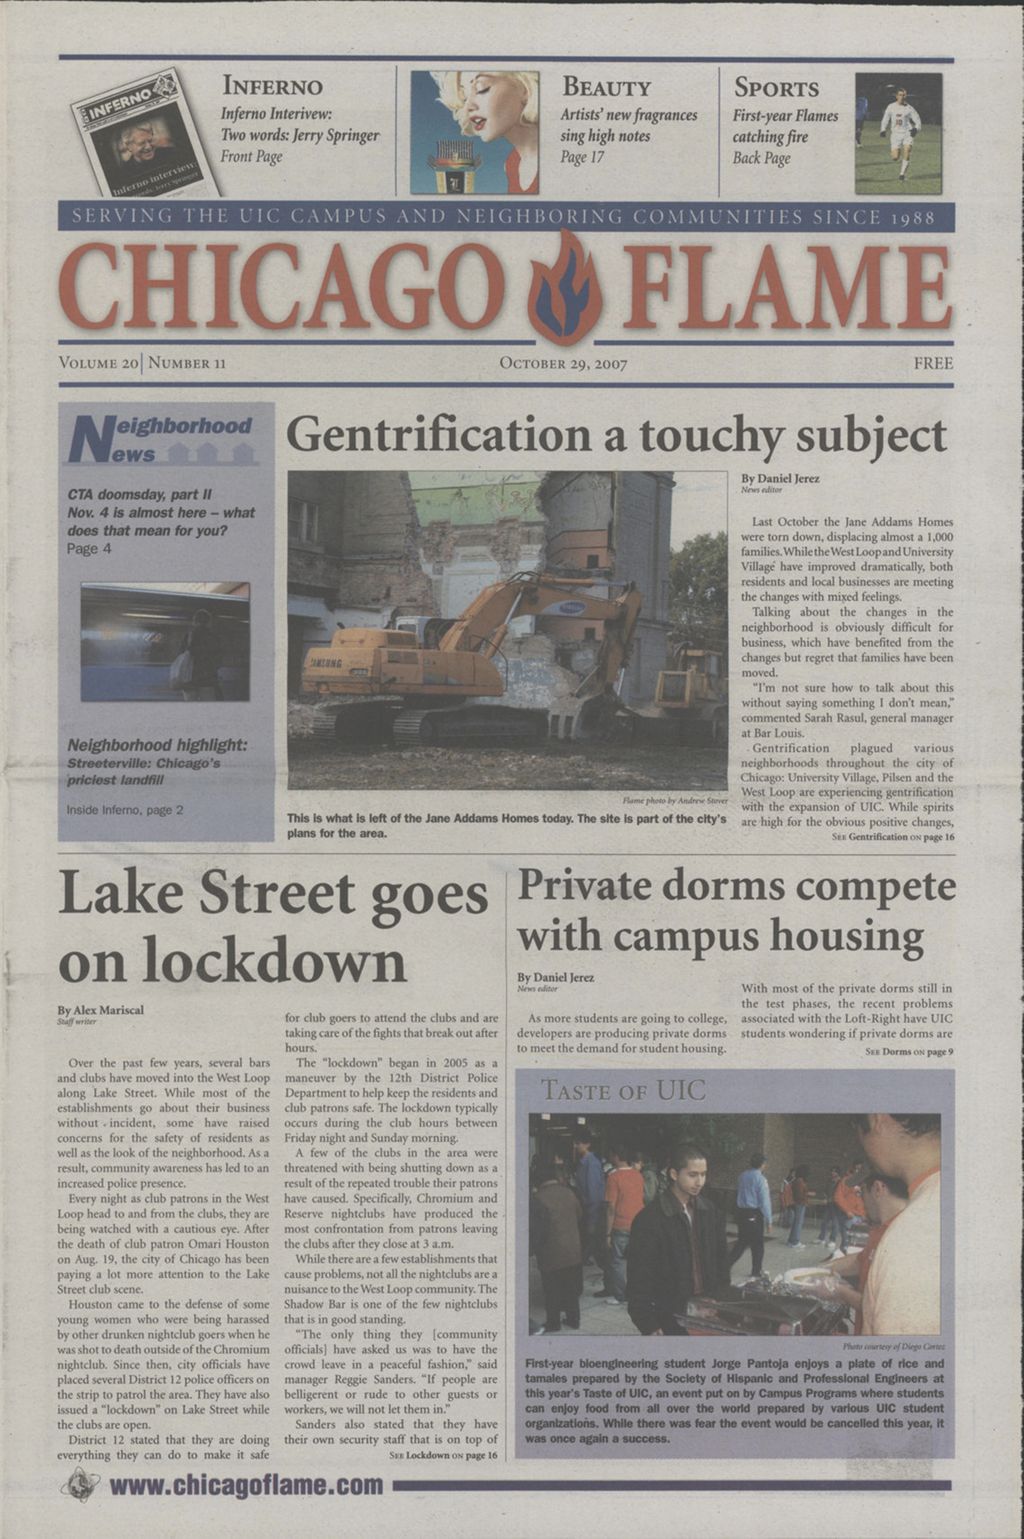 Miniature of Chicago Flame (October 29, 2007)